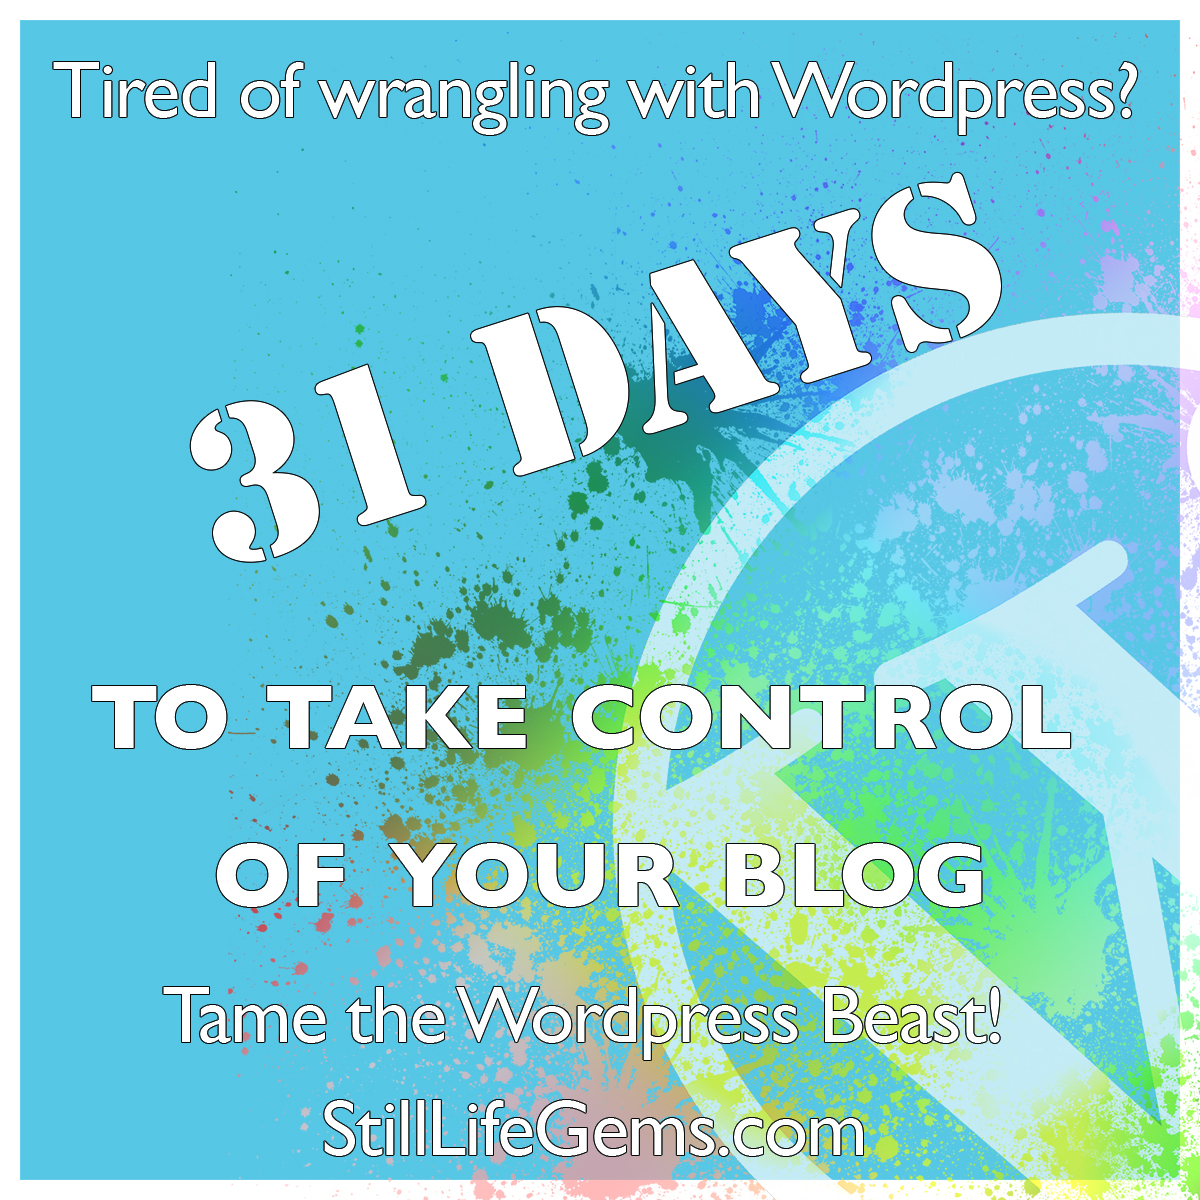 31 Days to Take Control of Your Blog